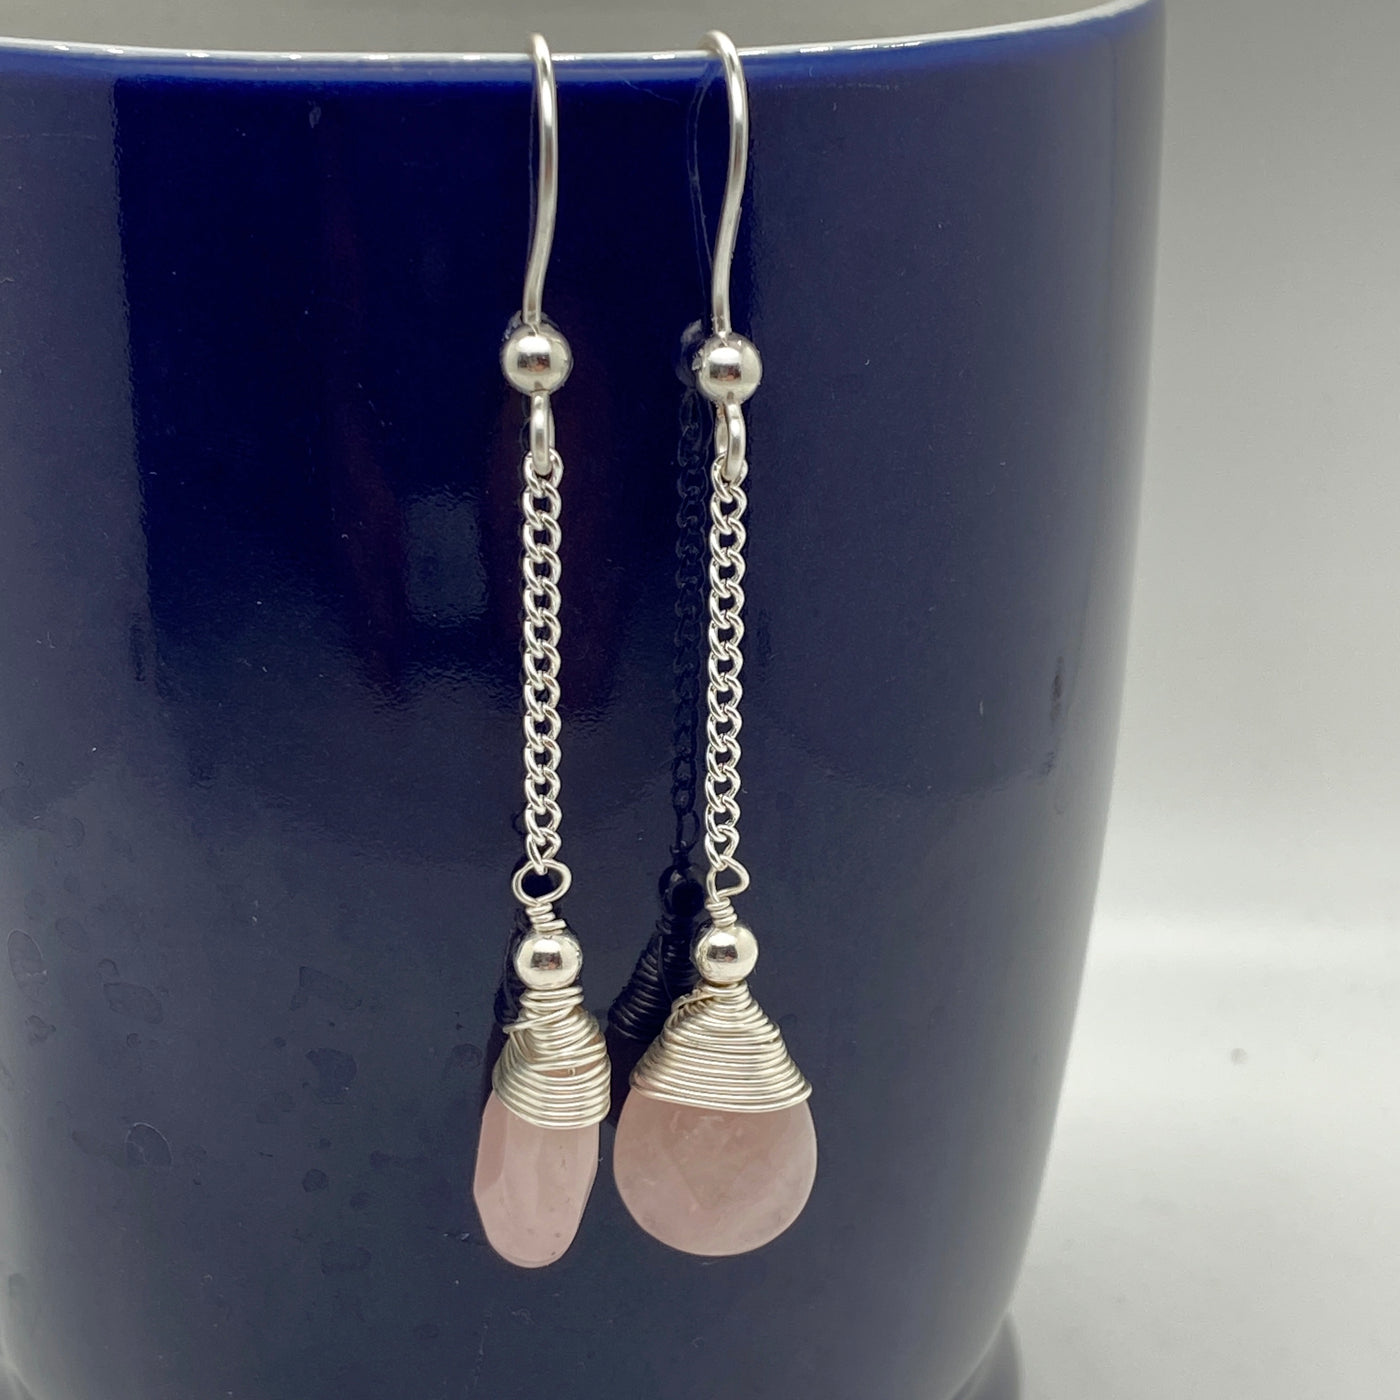 Rose quartz briolettes wrapped in silver on silver chain